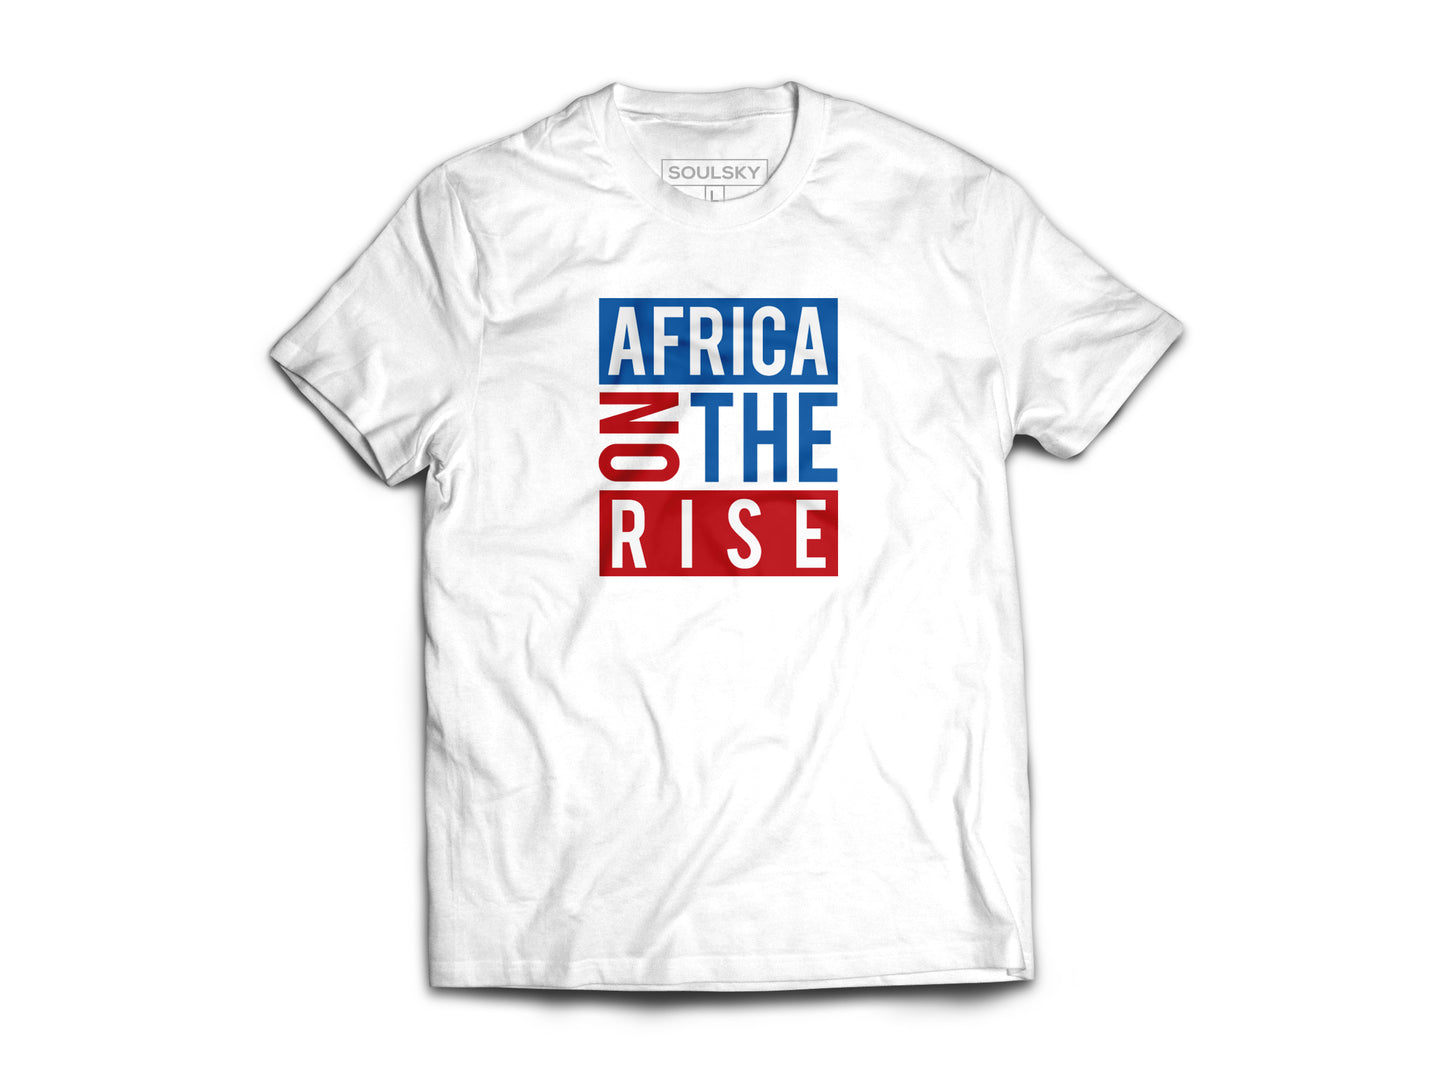 AFRICA ON THE RISE Tee (White) - Kids